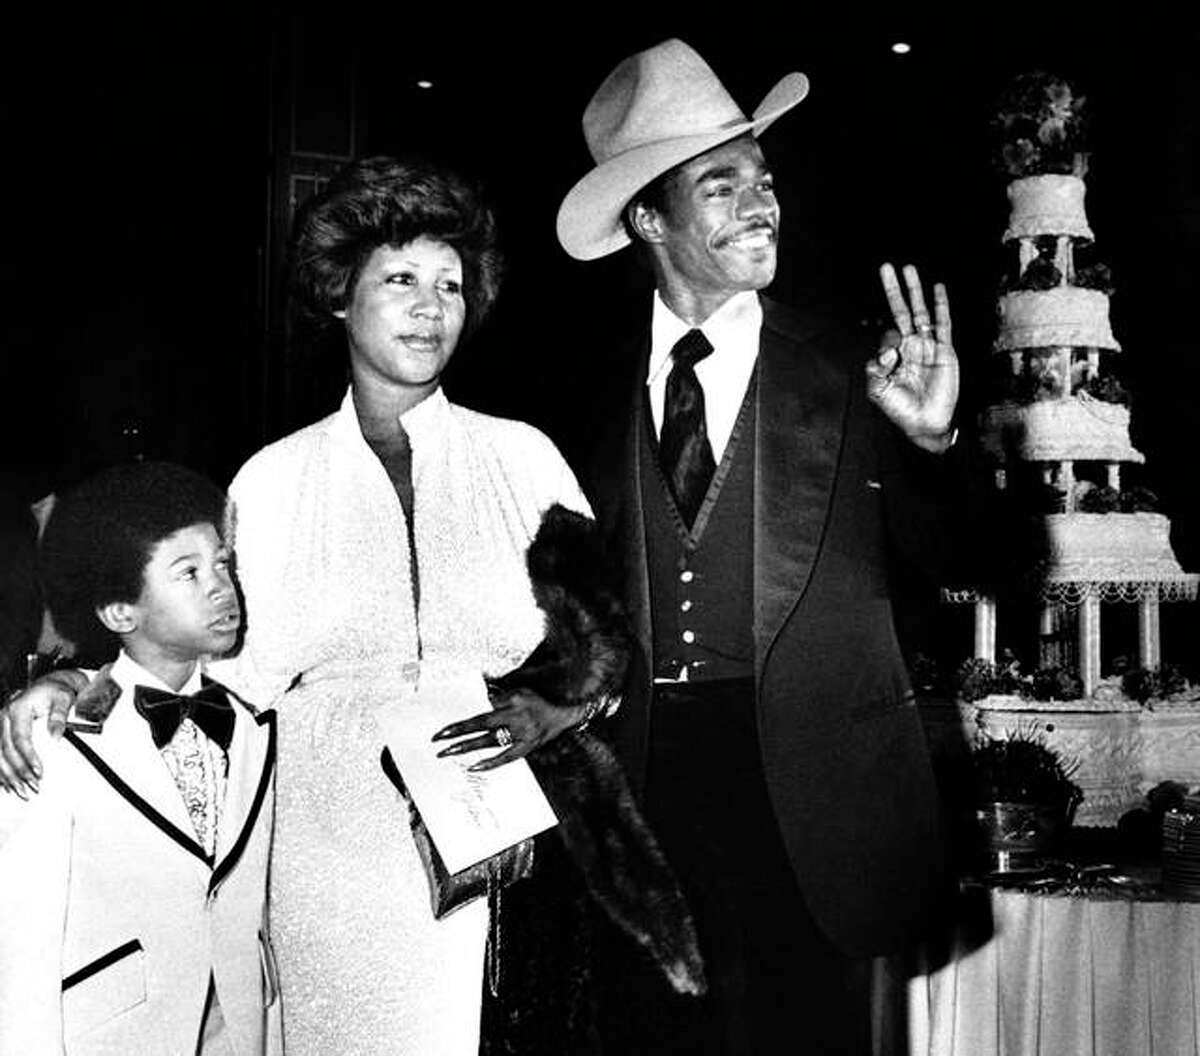 In this April 17, 1978, file photo, Aretha Franklin and her new husband, Glen Turman, arrive at a Los Angeles hotel for their wedding reception. Turman signals his OK and pleasure at the reception as Kecalf 8, Aretha’s son looks on. (AP Photo/Doug Pizac, File)